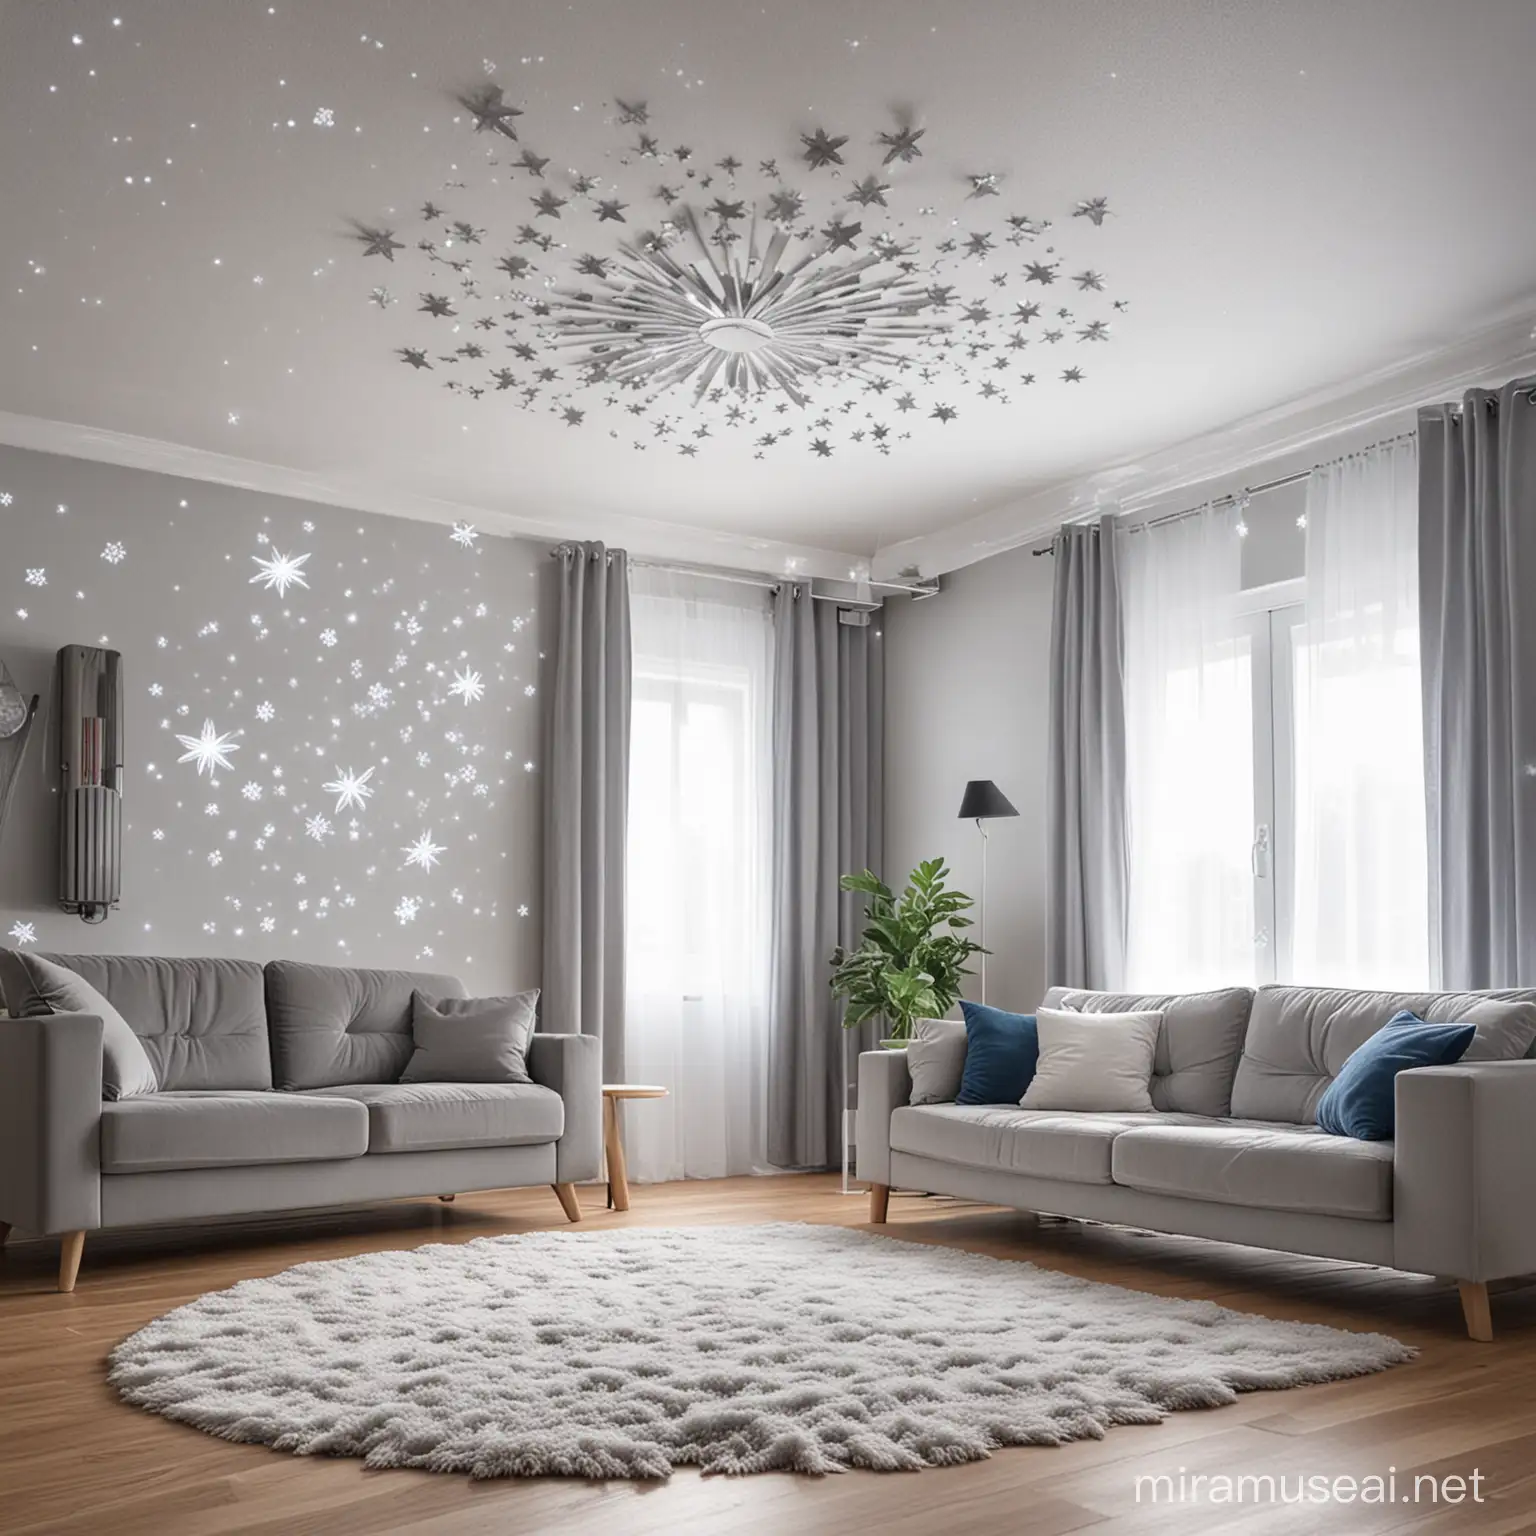 Cooling Living Room with Ice Star Air Conditioner